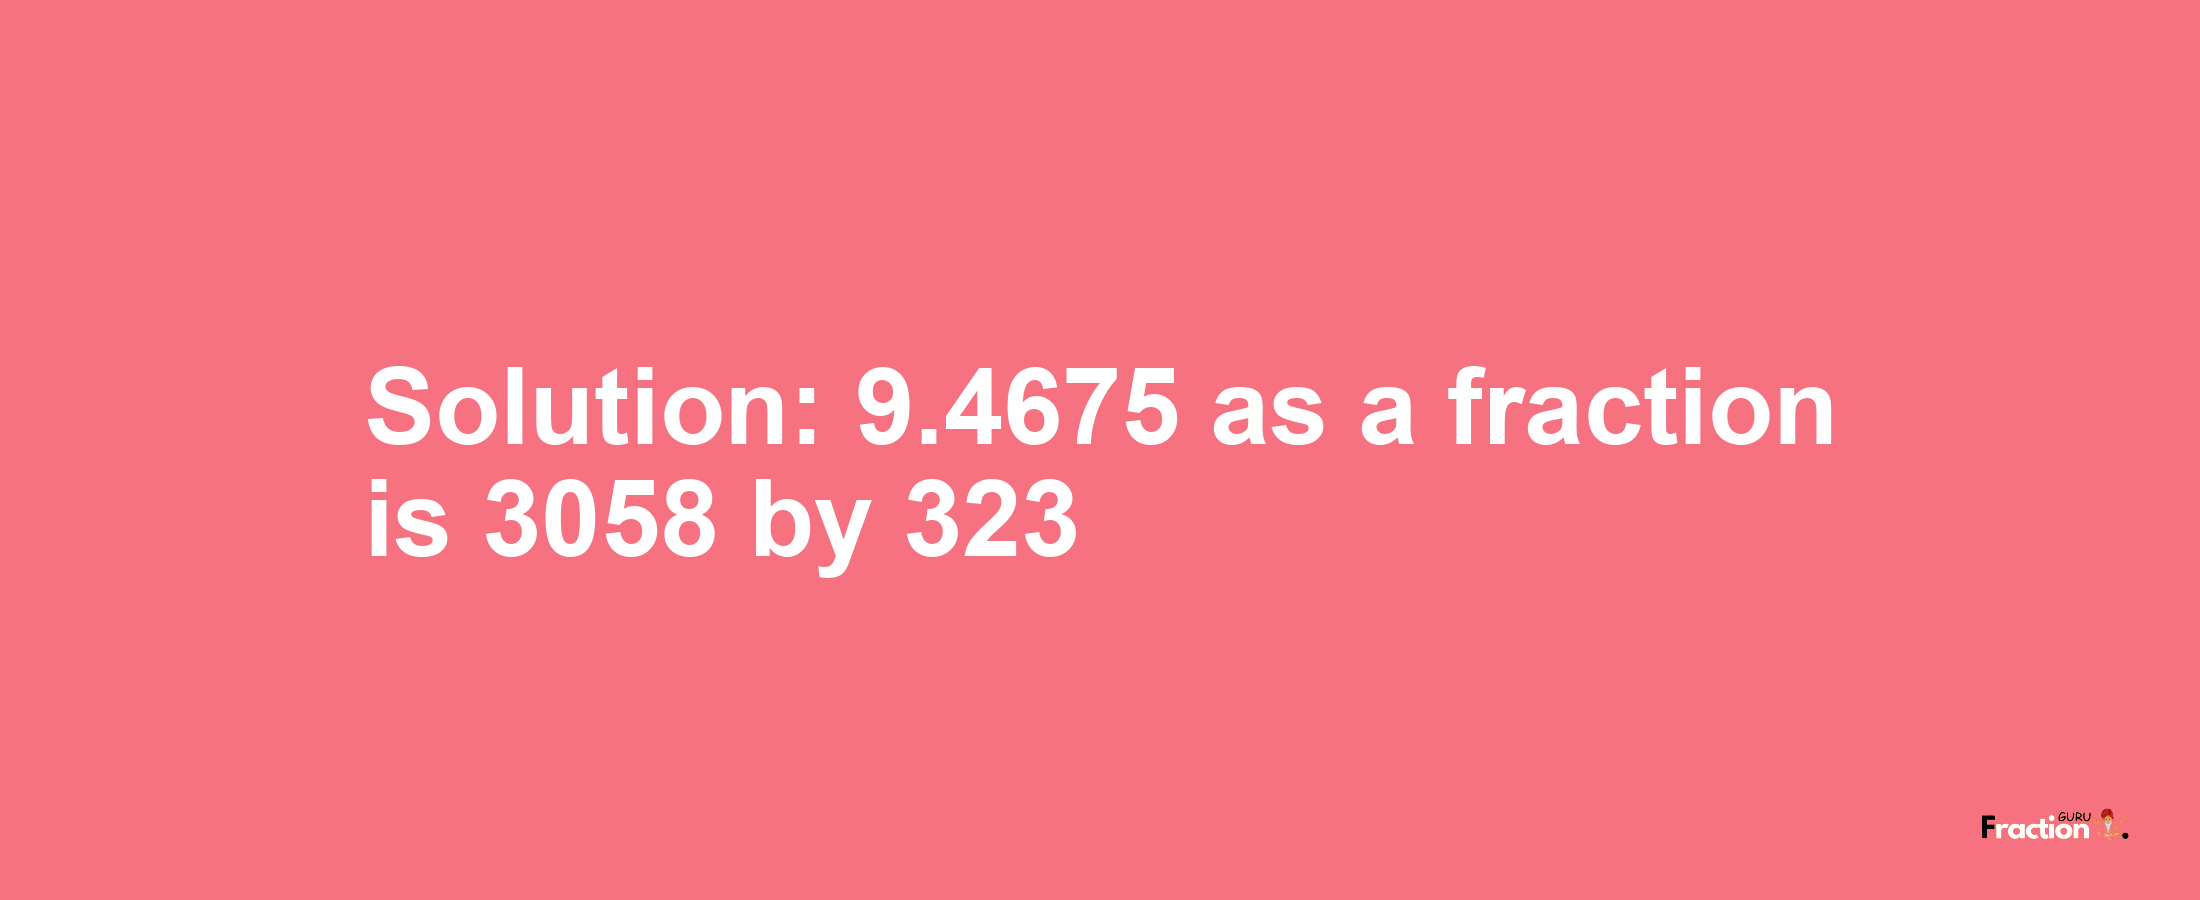 Solution:9.4675 as a fraction is 3058/323